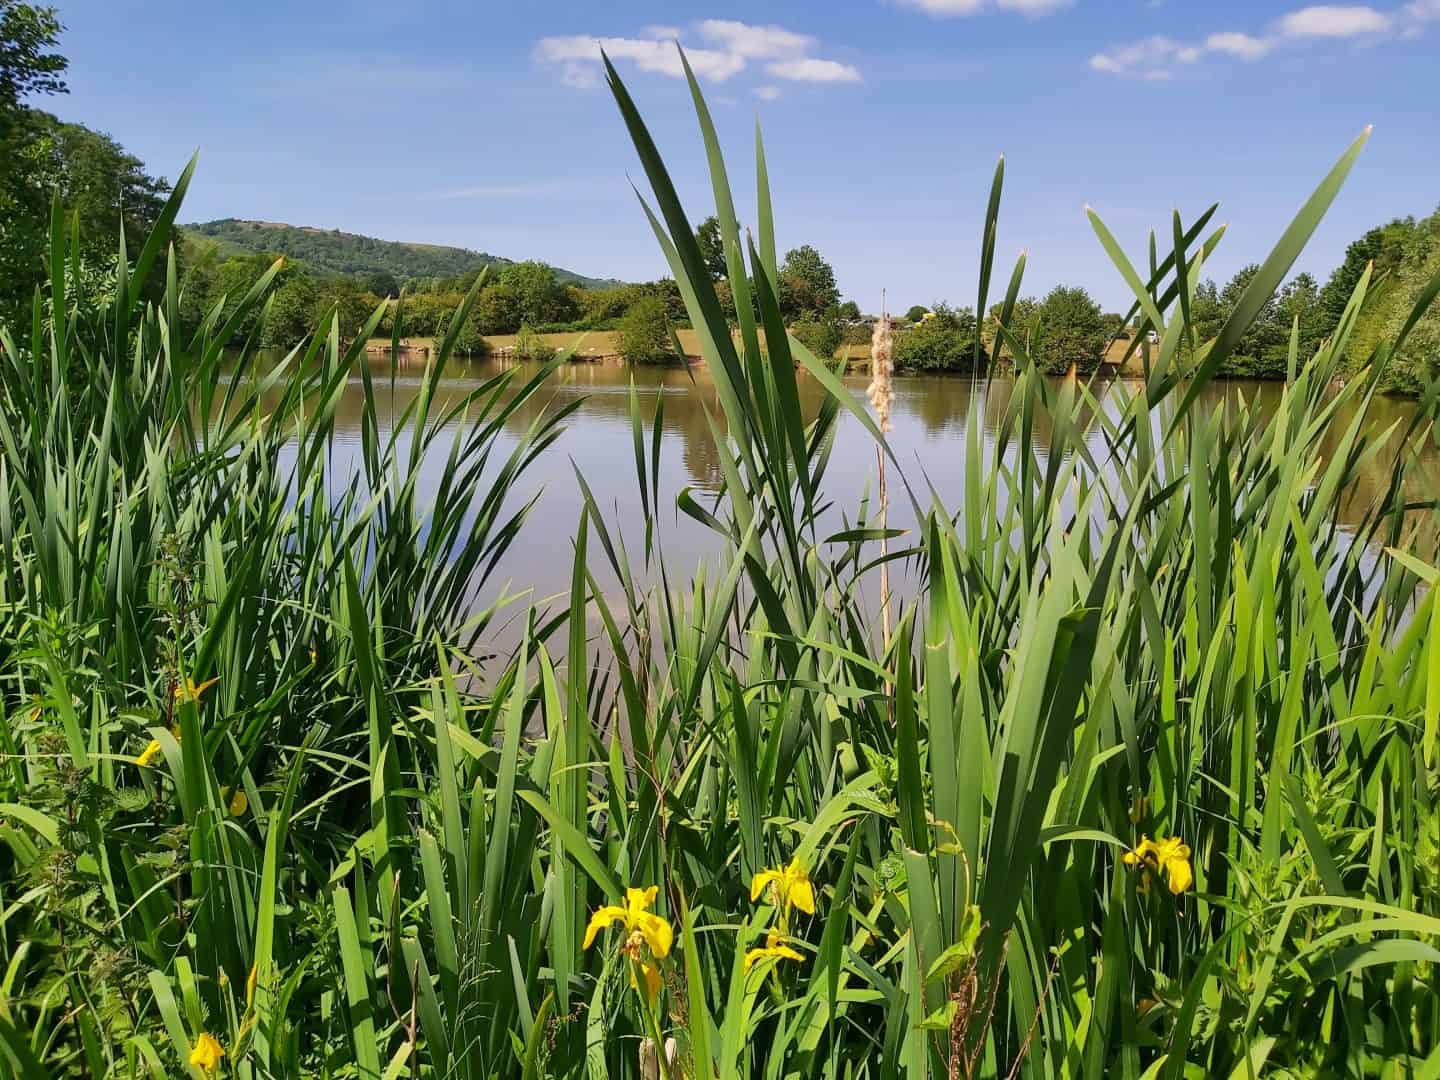 Reeds in foreground with yellow orchid flowers among them. View across a pond with Malvern Hills behind. 